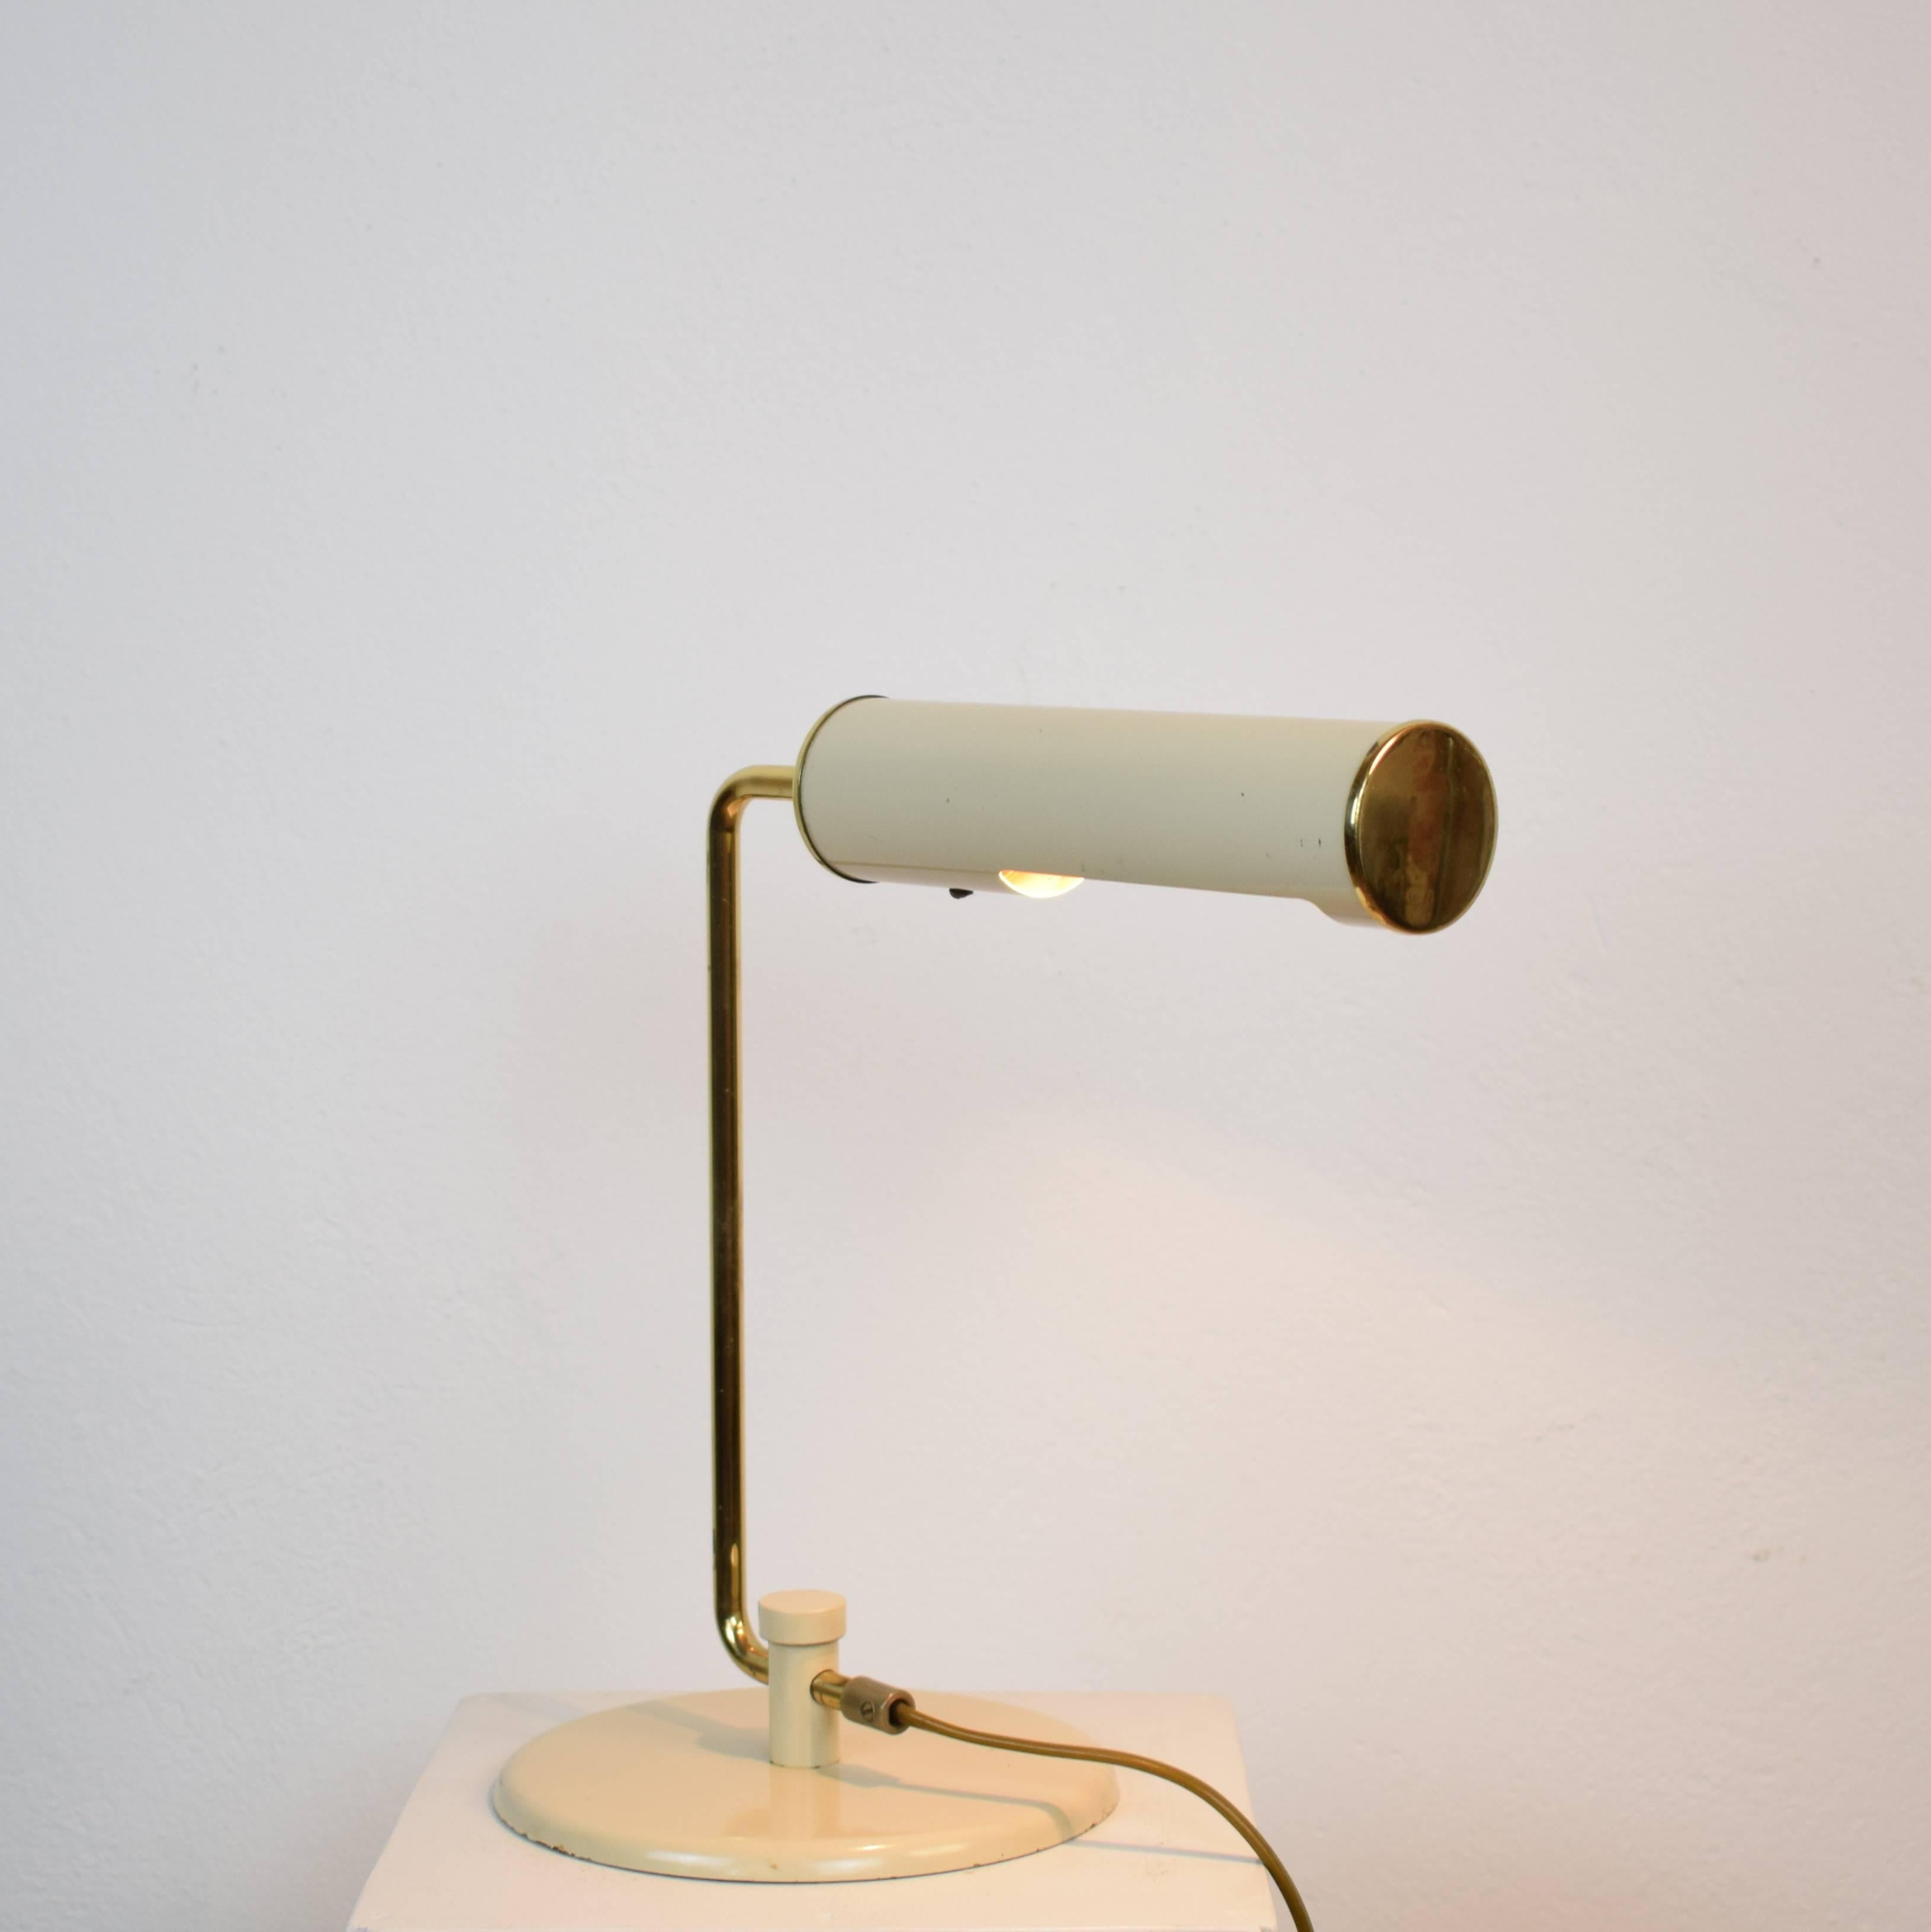 Italian Midcentury Metal and Brass Table Lamp, 1970s